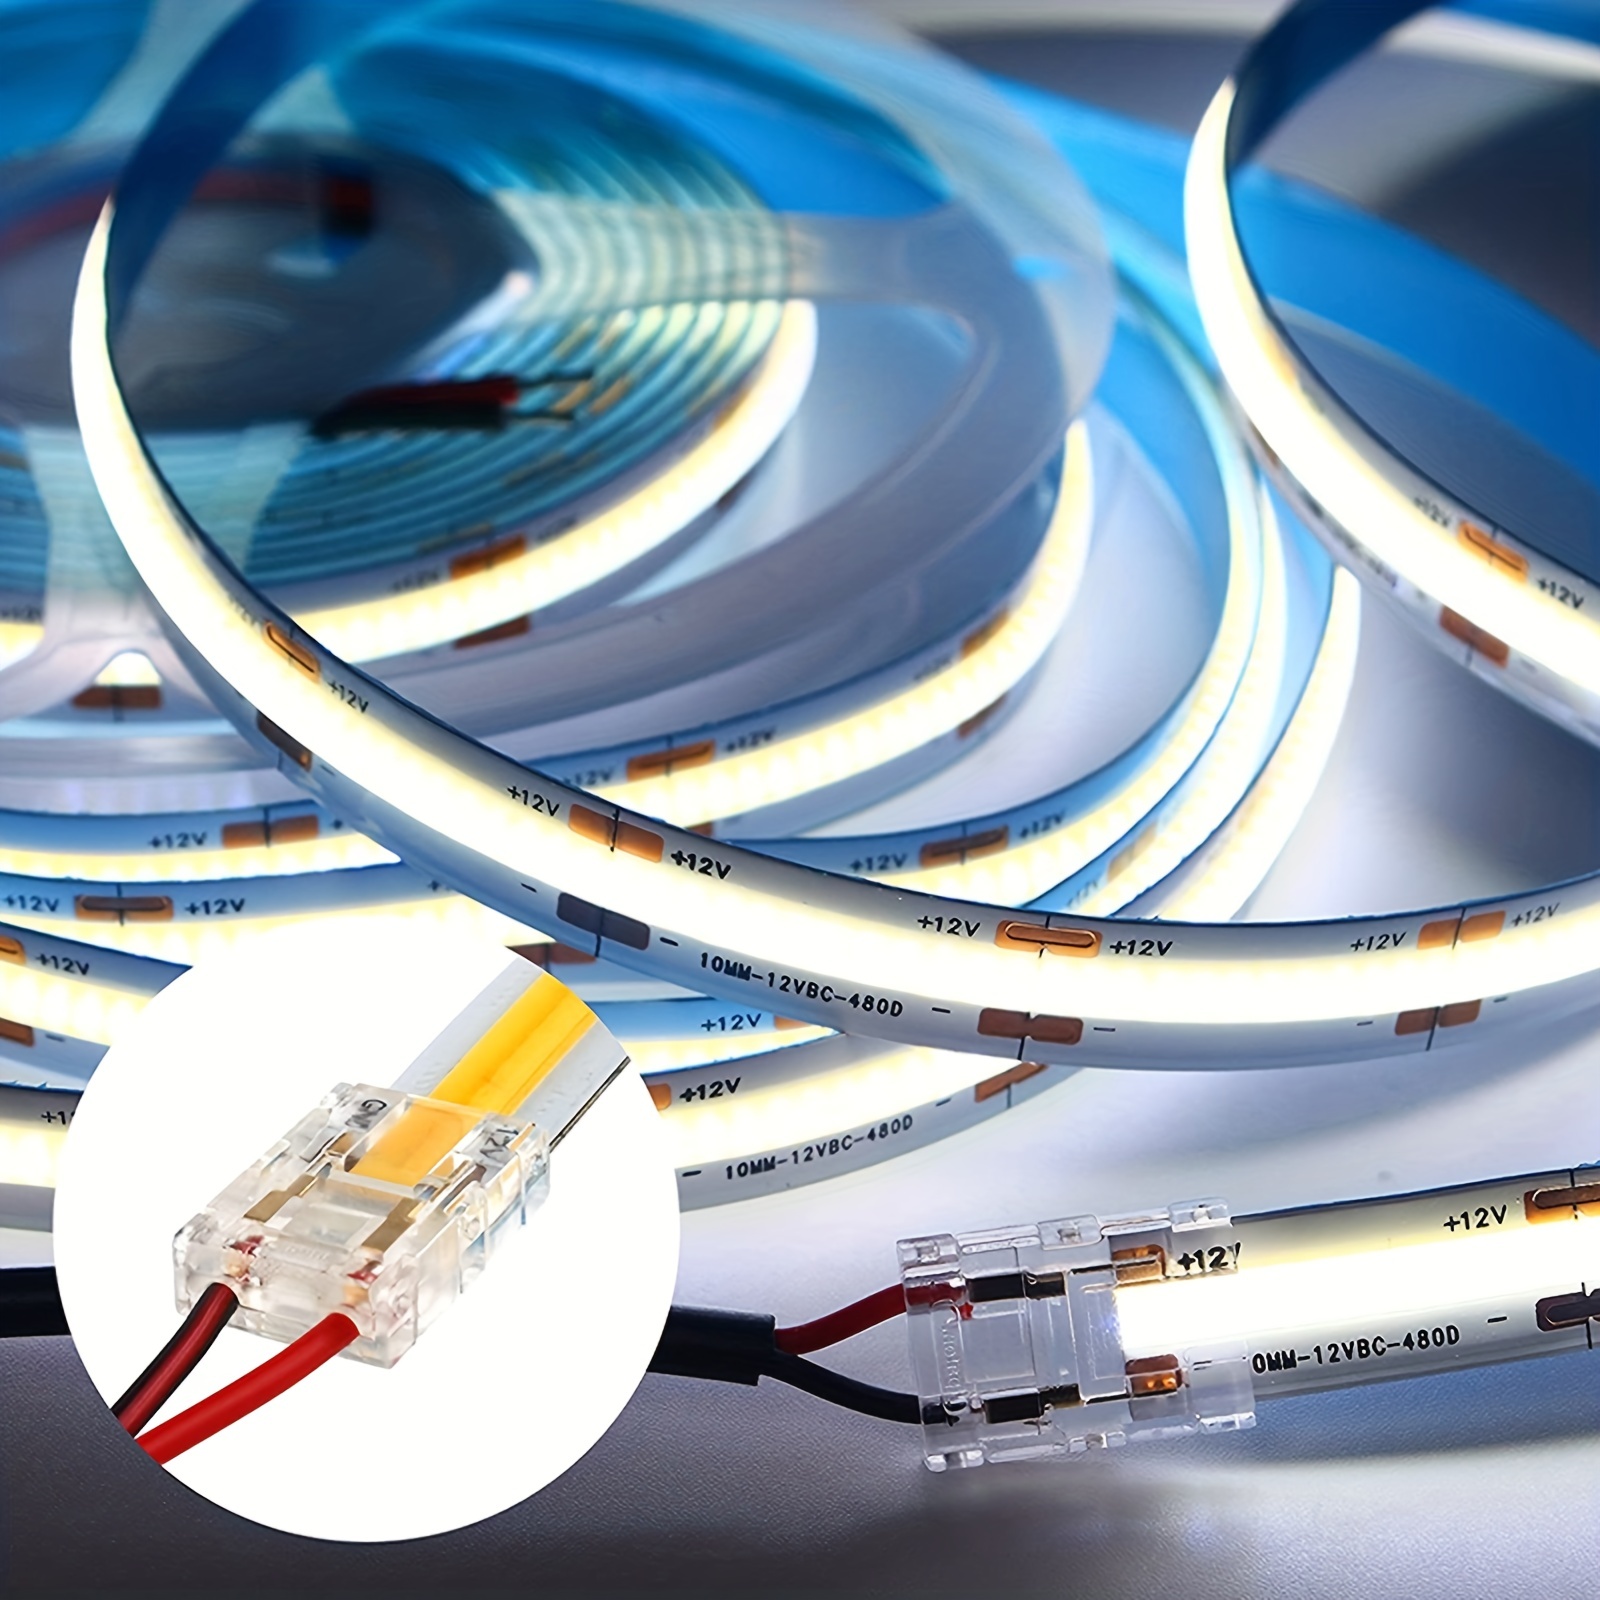 5 Pin 10mm LED Strip to Wire Connector rgbw Unwired Clips Solderless  Adapter Terminal Extension Connection for Multicolor LED Strip Lights 12V  24V